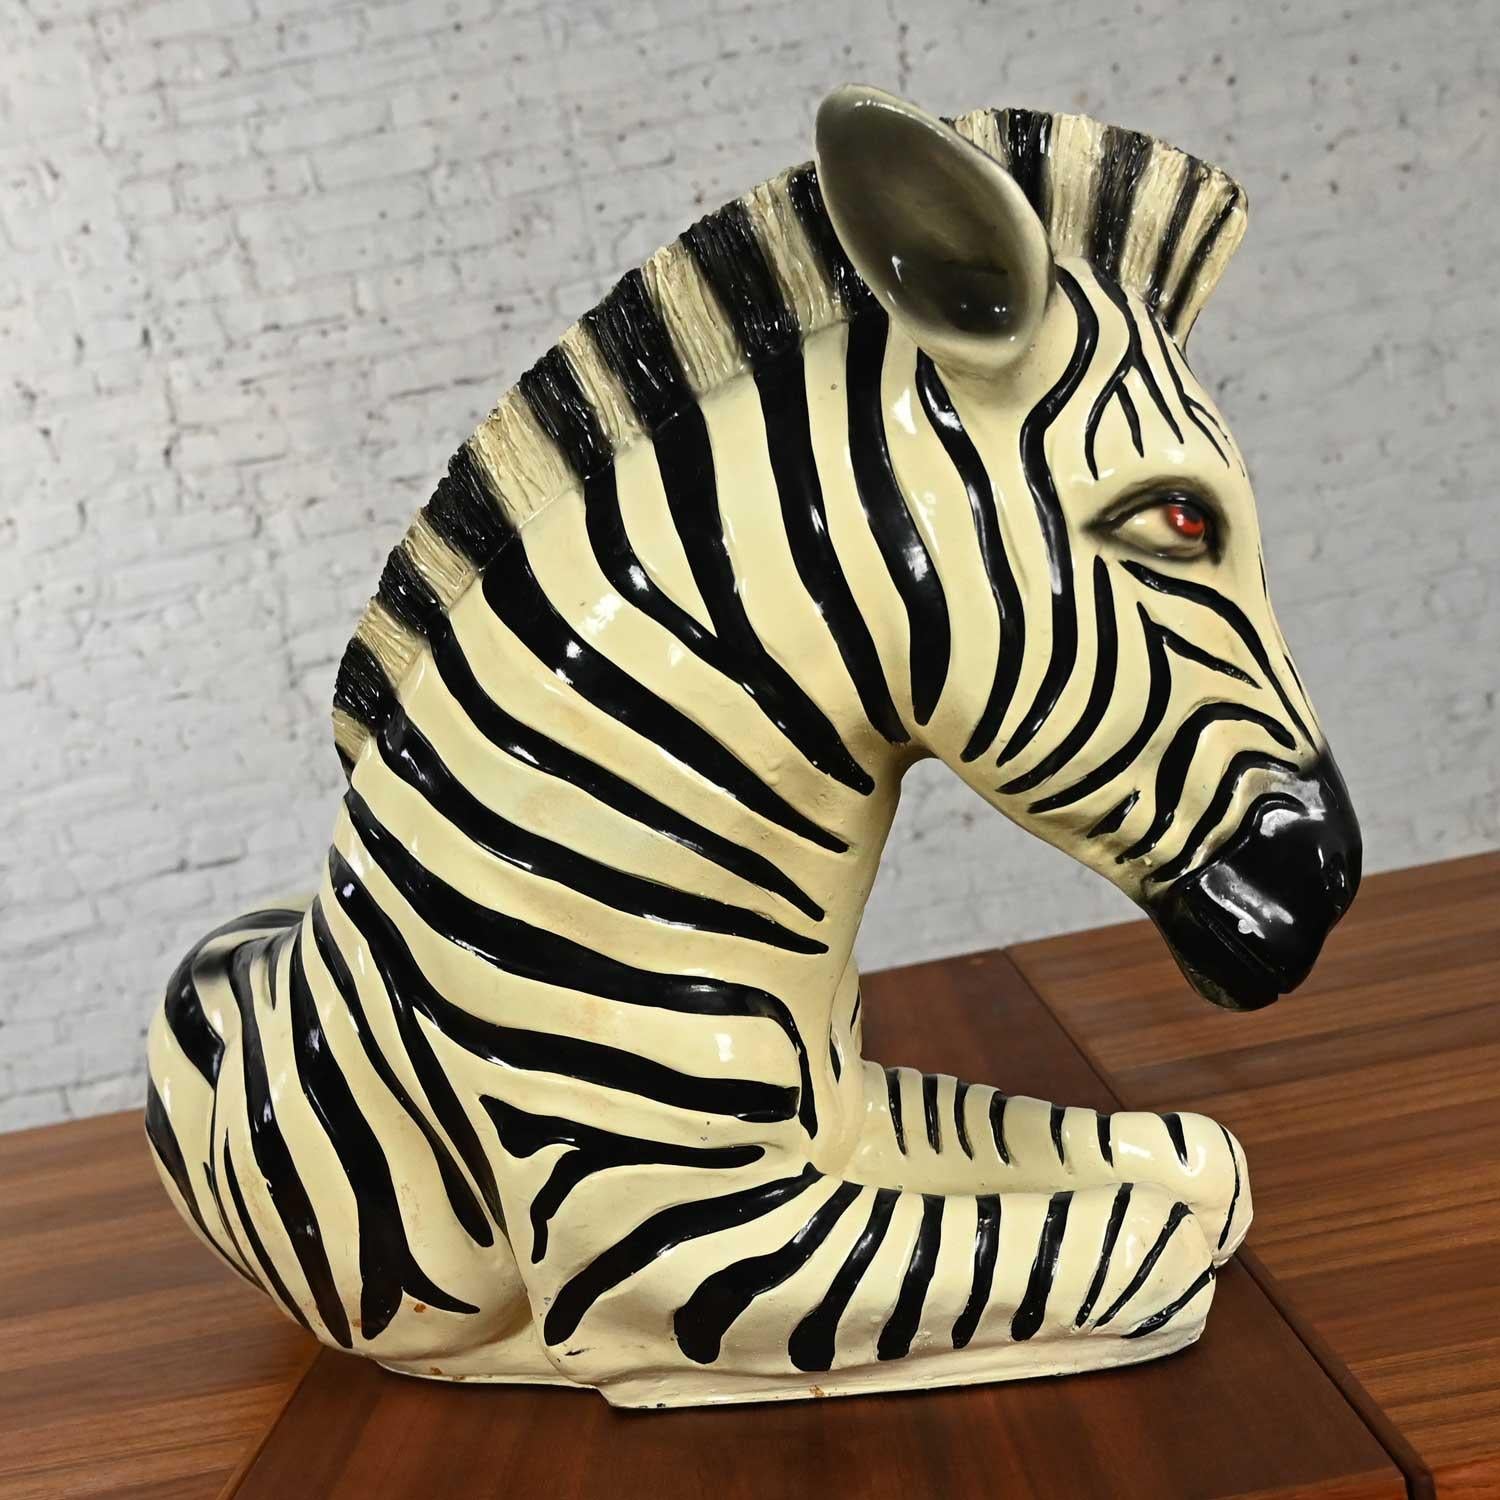 1970s Marwal Industries Large Scale Zebra Molded Resin Statue or Sculpture For Sale 1